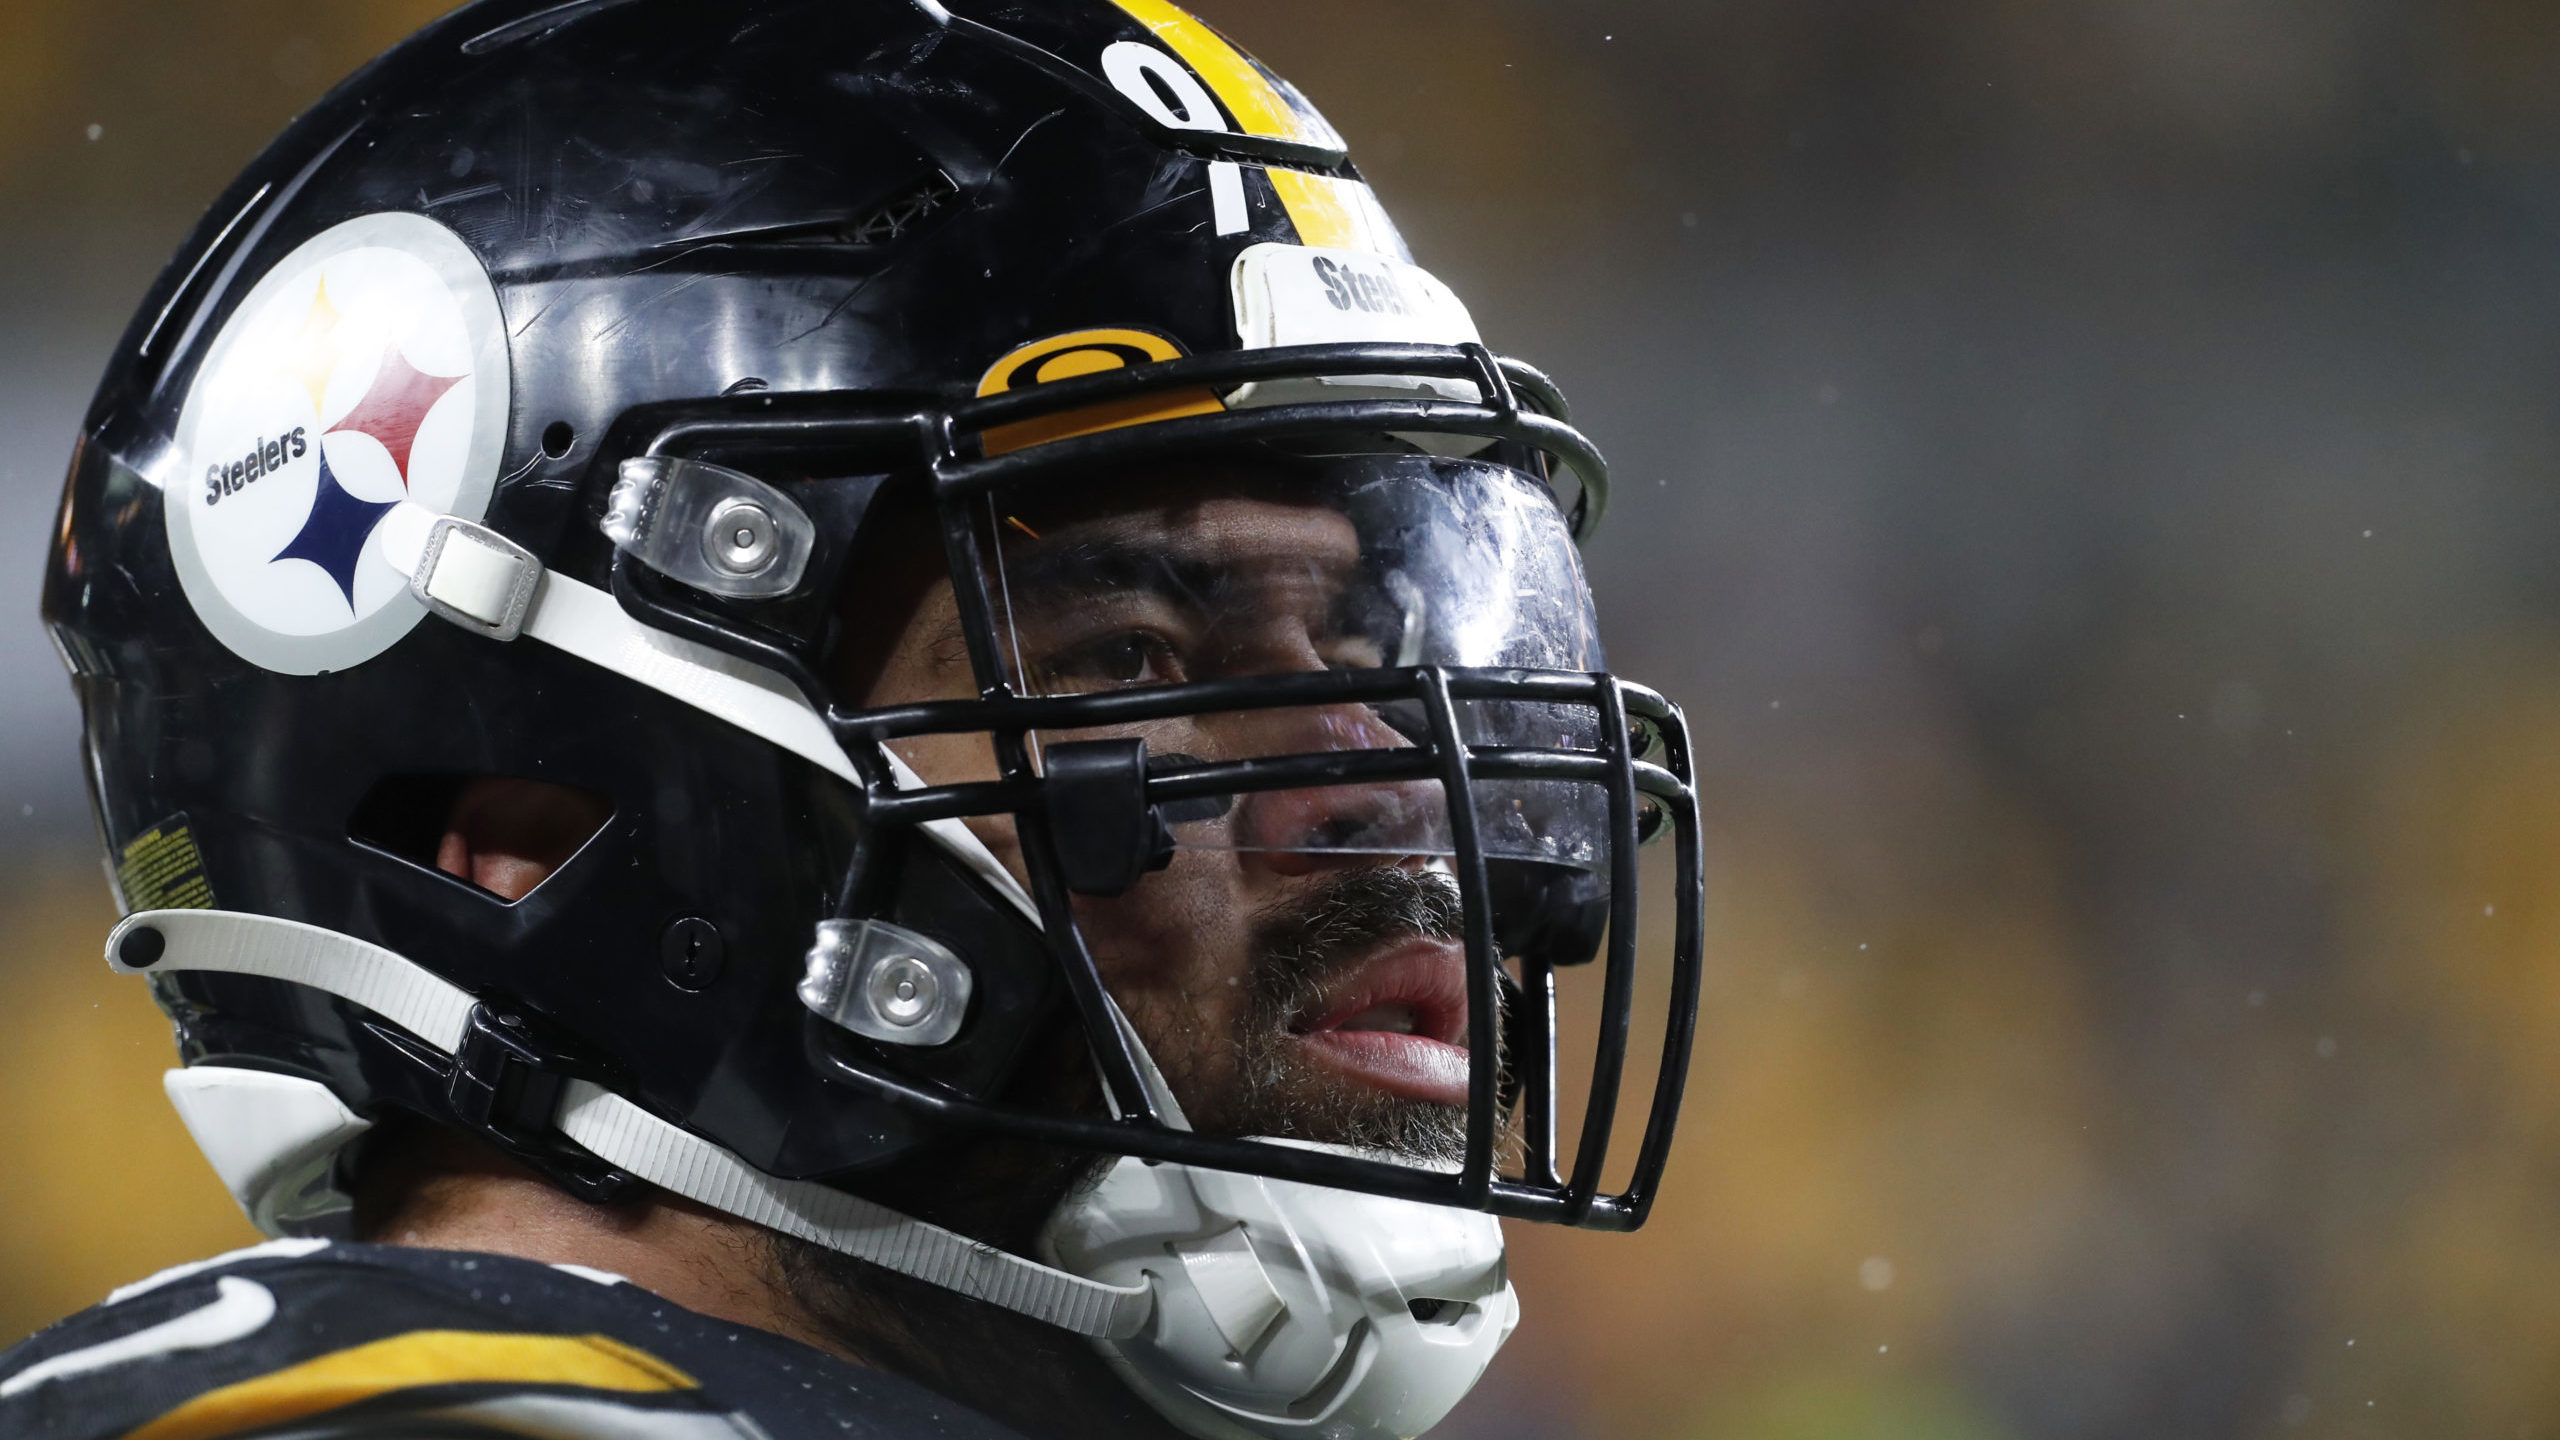 NFL Officials Were Right to Penalize Steelers’ Heyward